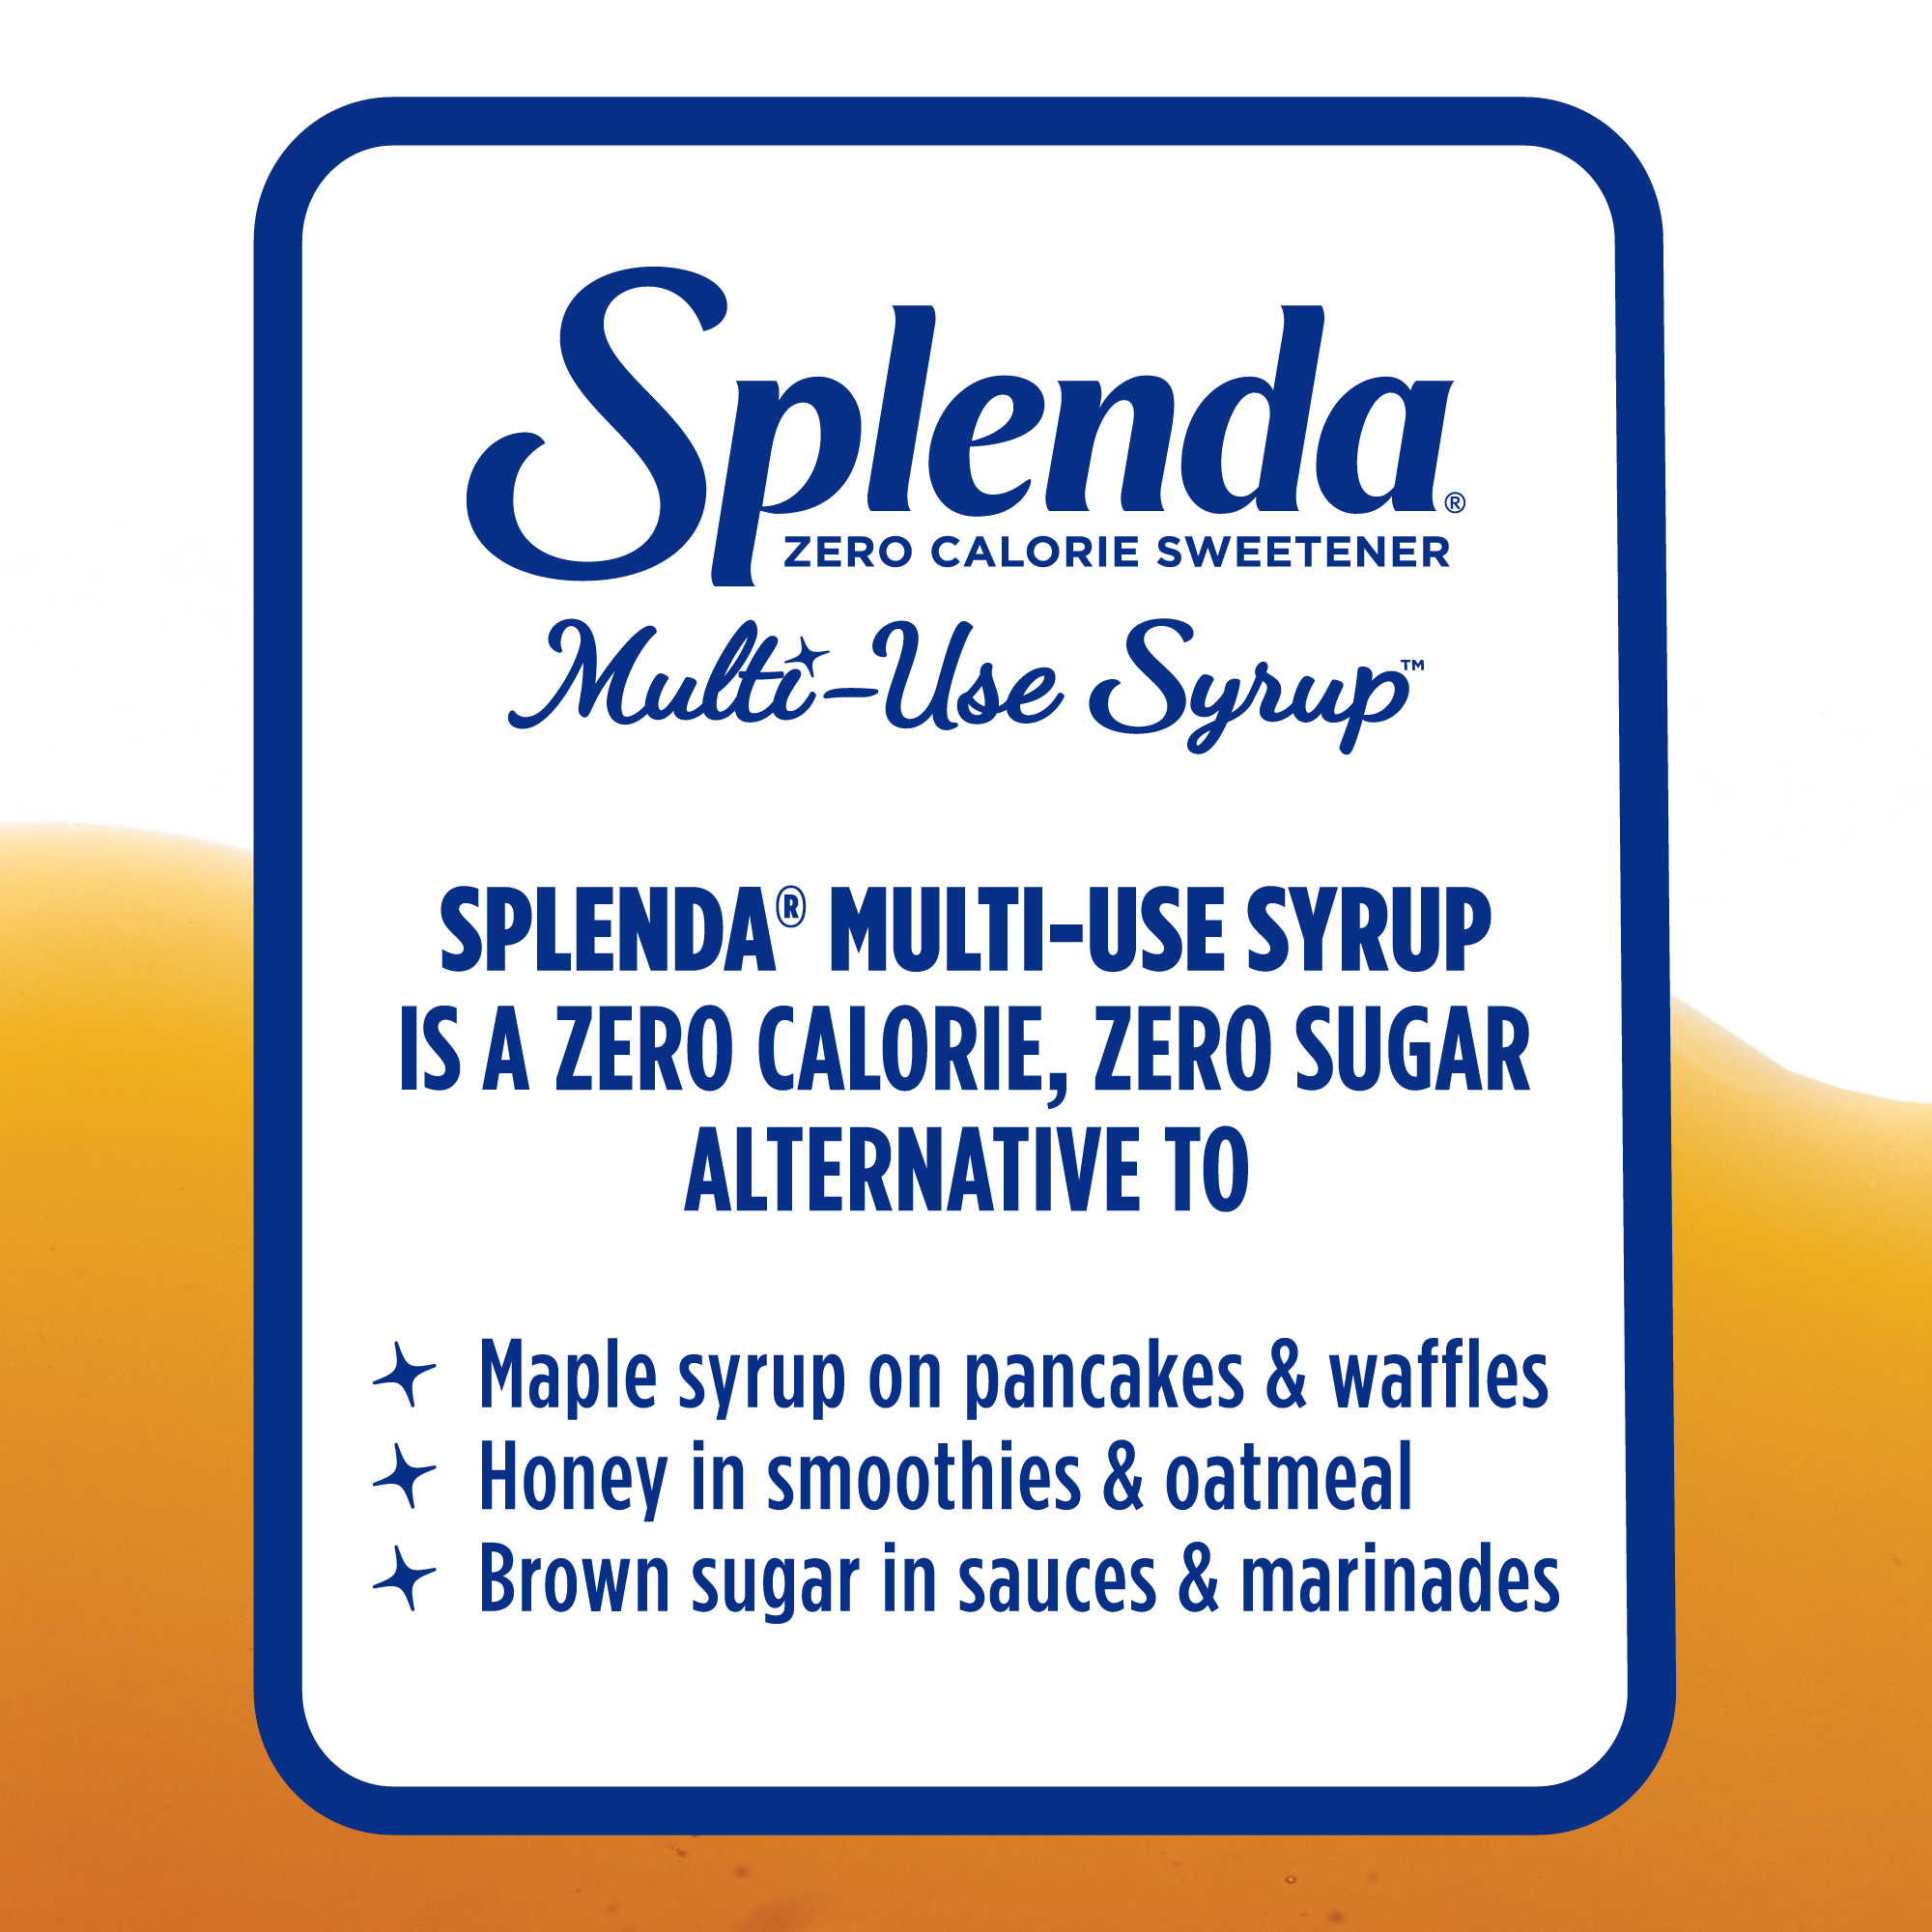 Splenda Multi-Use Syrup Benefit Call-Outs